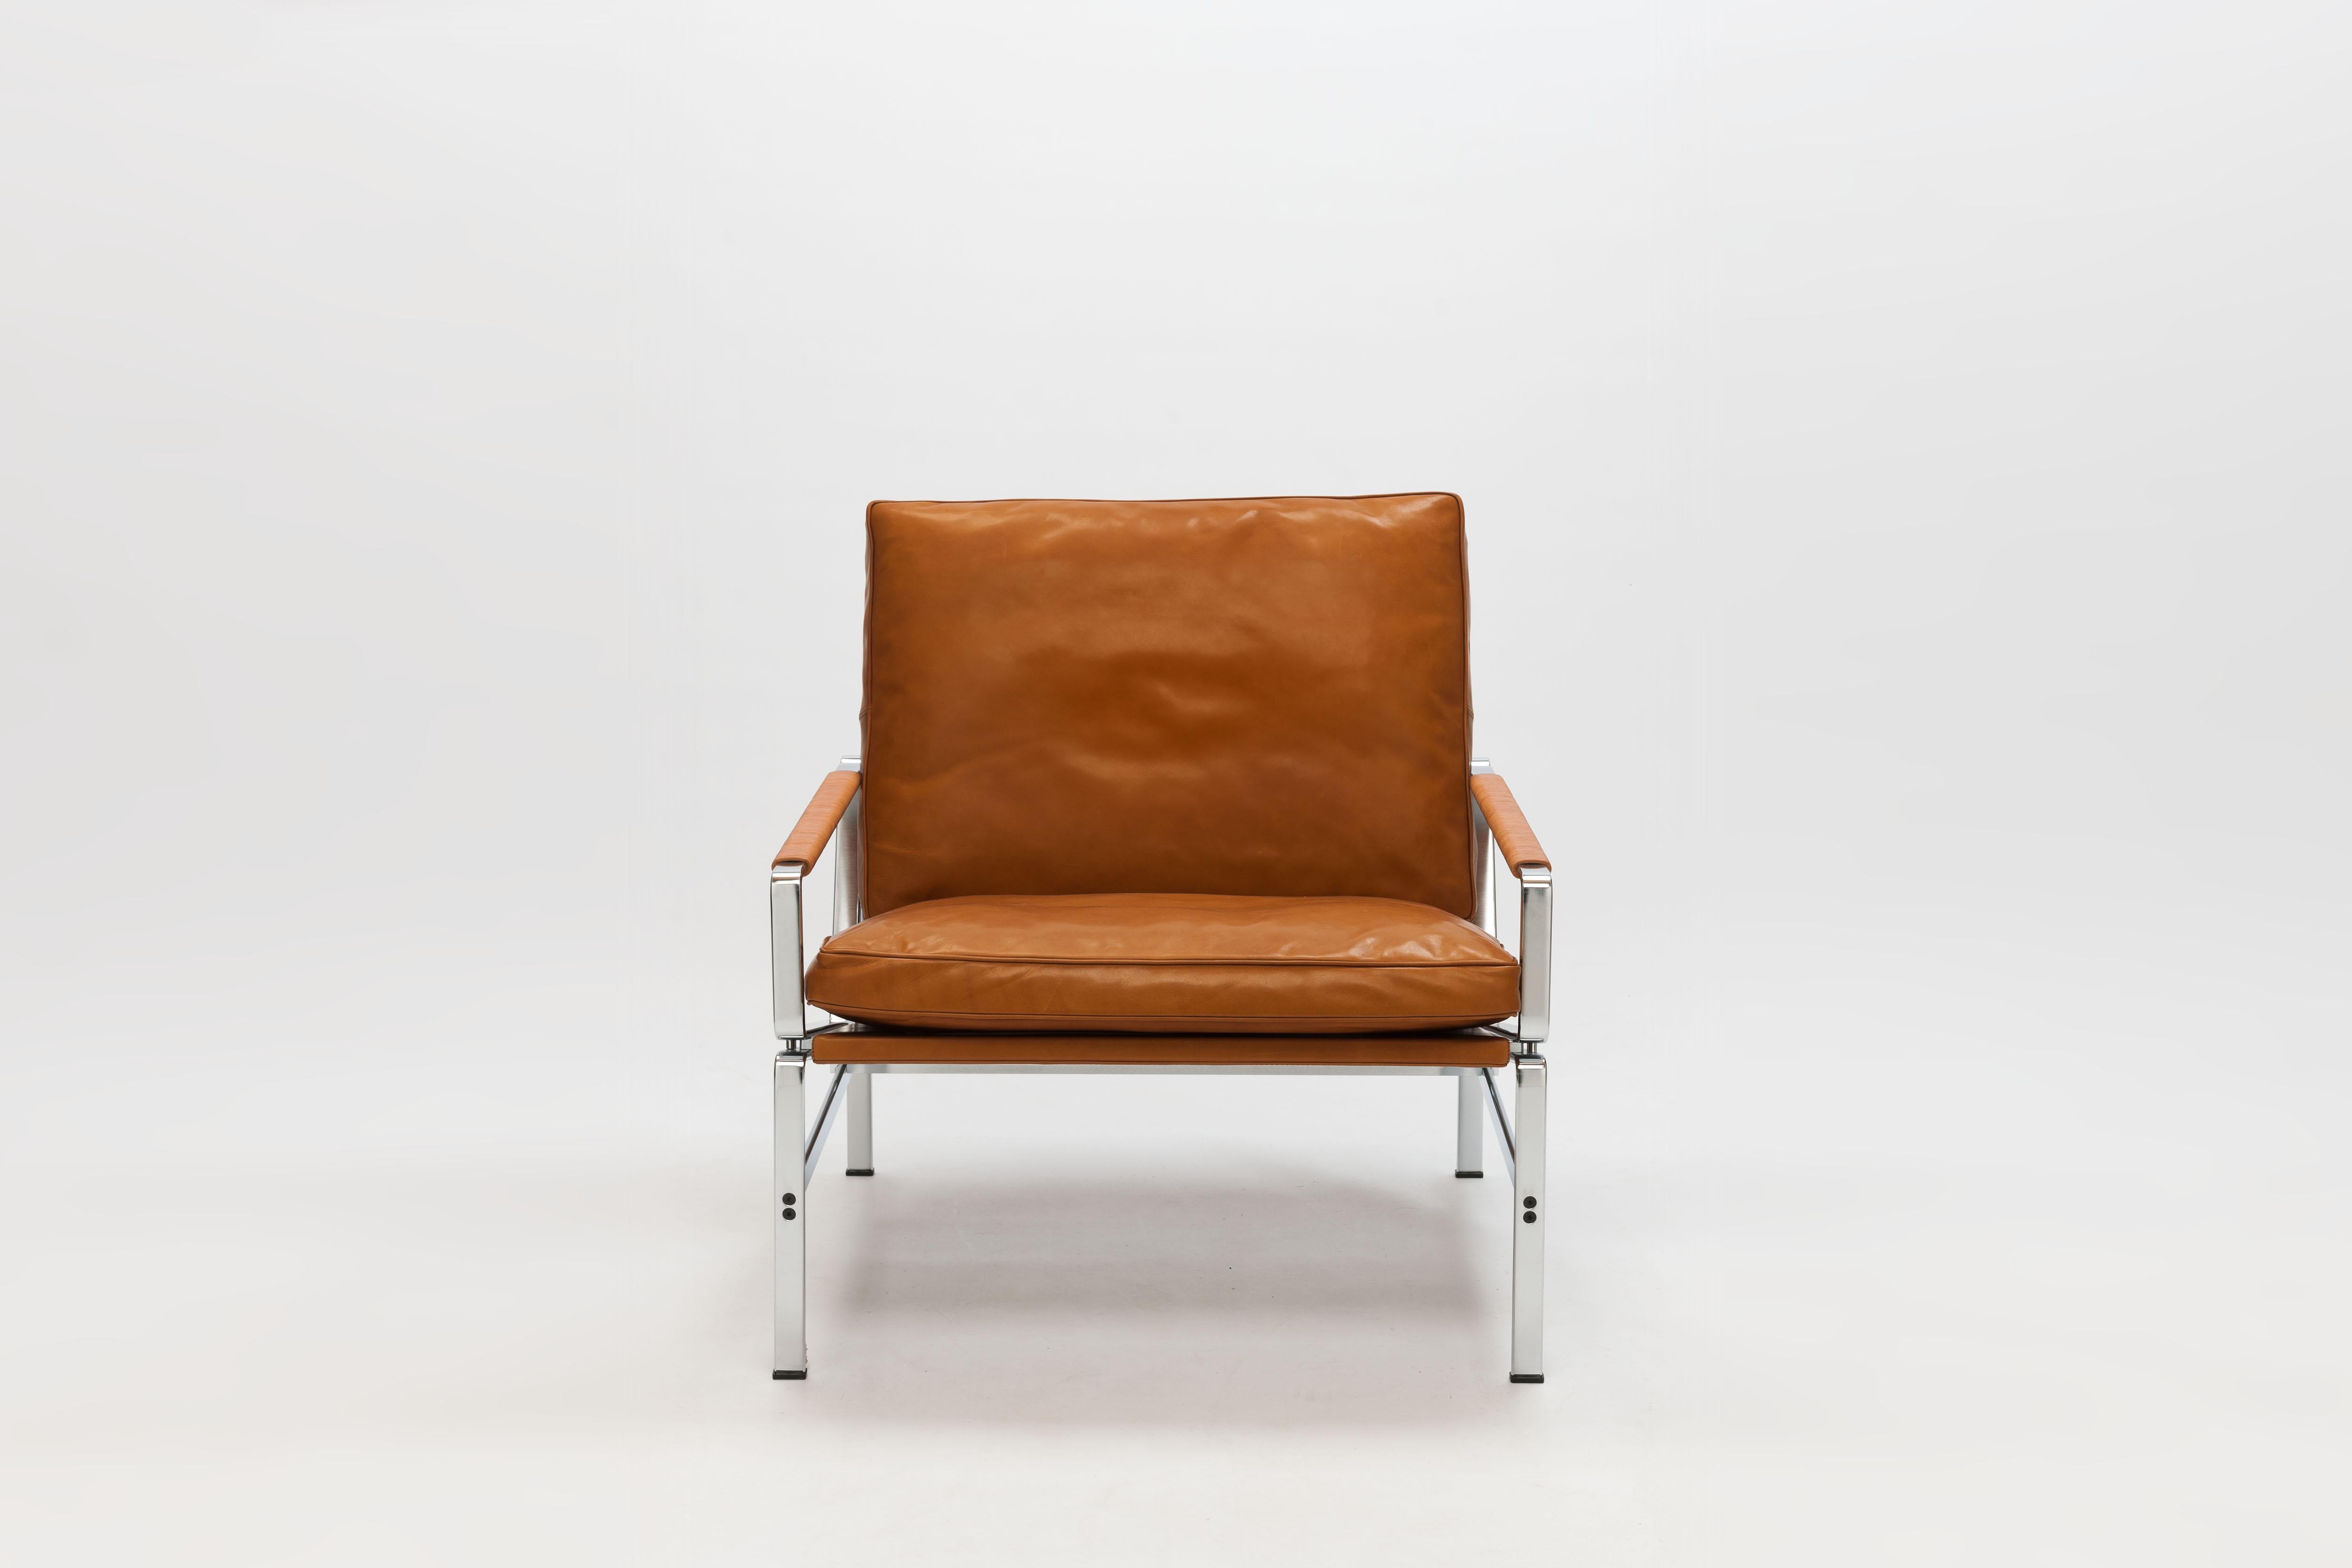 One of the most refined and understated modern Danish chairs is this model 6720 by Danish designers Preben Fabricius & Jørgen Kastholm. The chair was designed in 1965 as a part of a modular seating system with 2, 3 and 4-seat sofas. 

The chair is